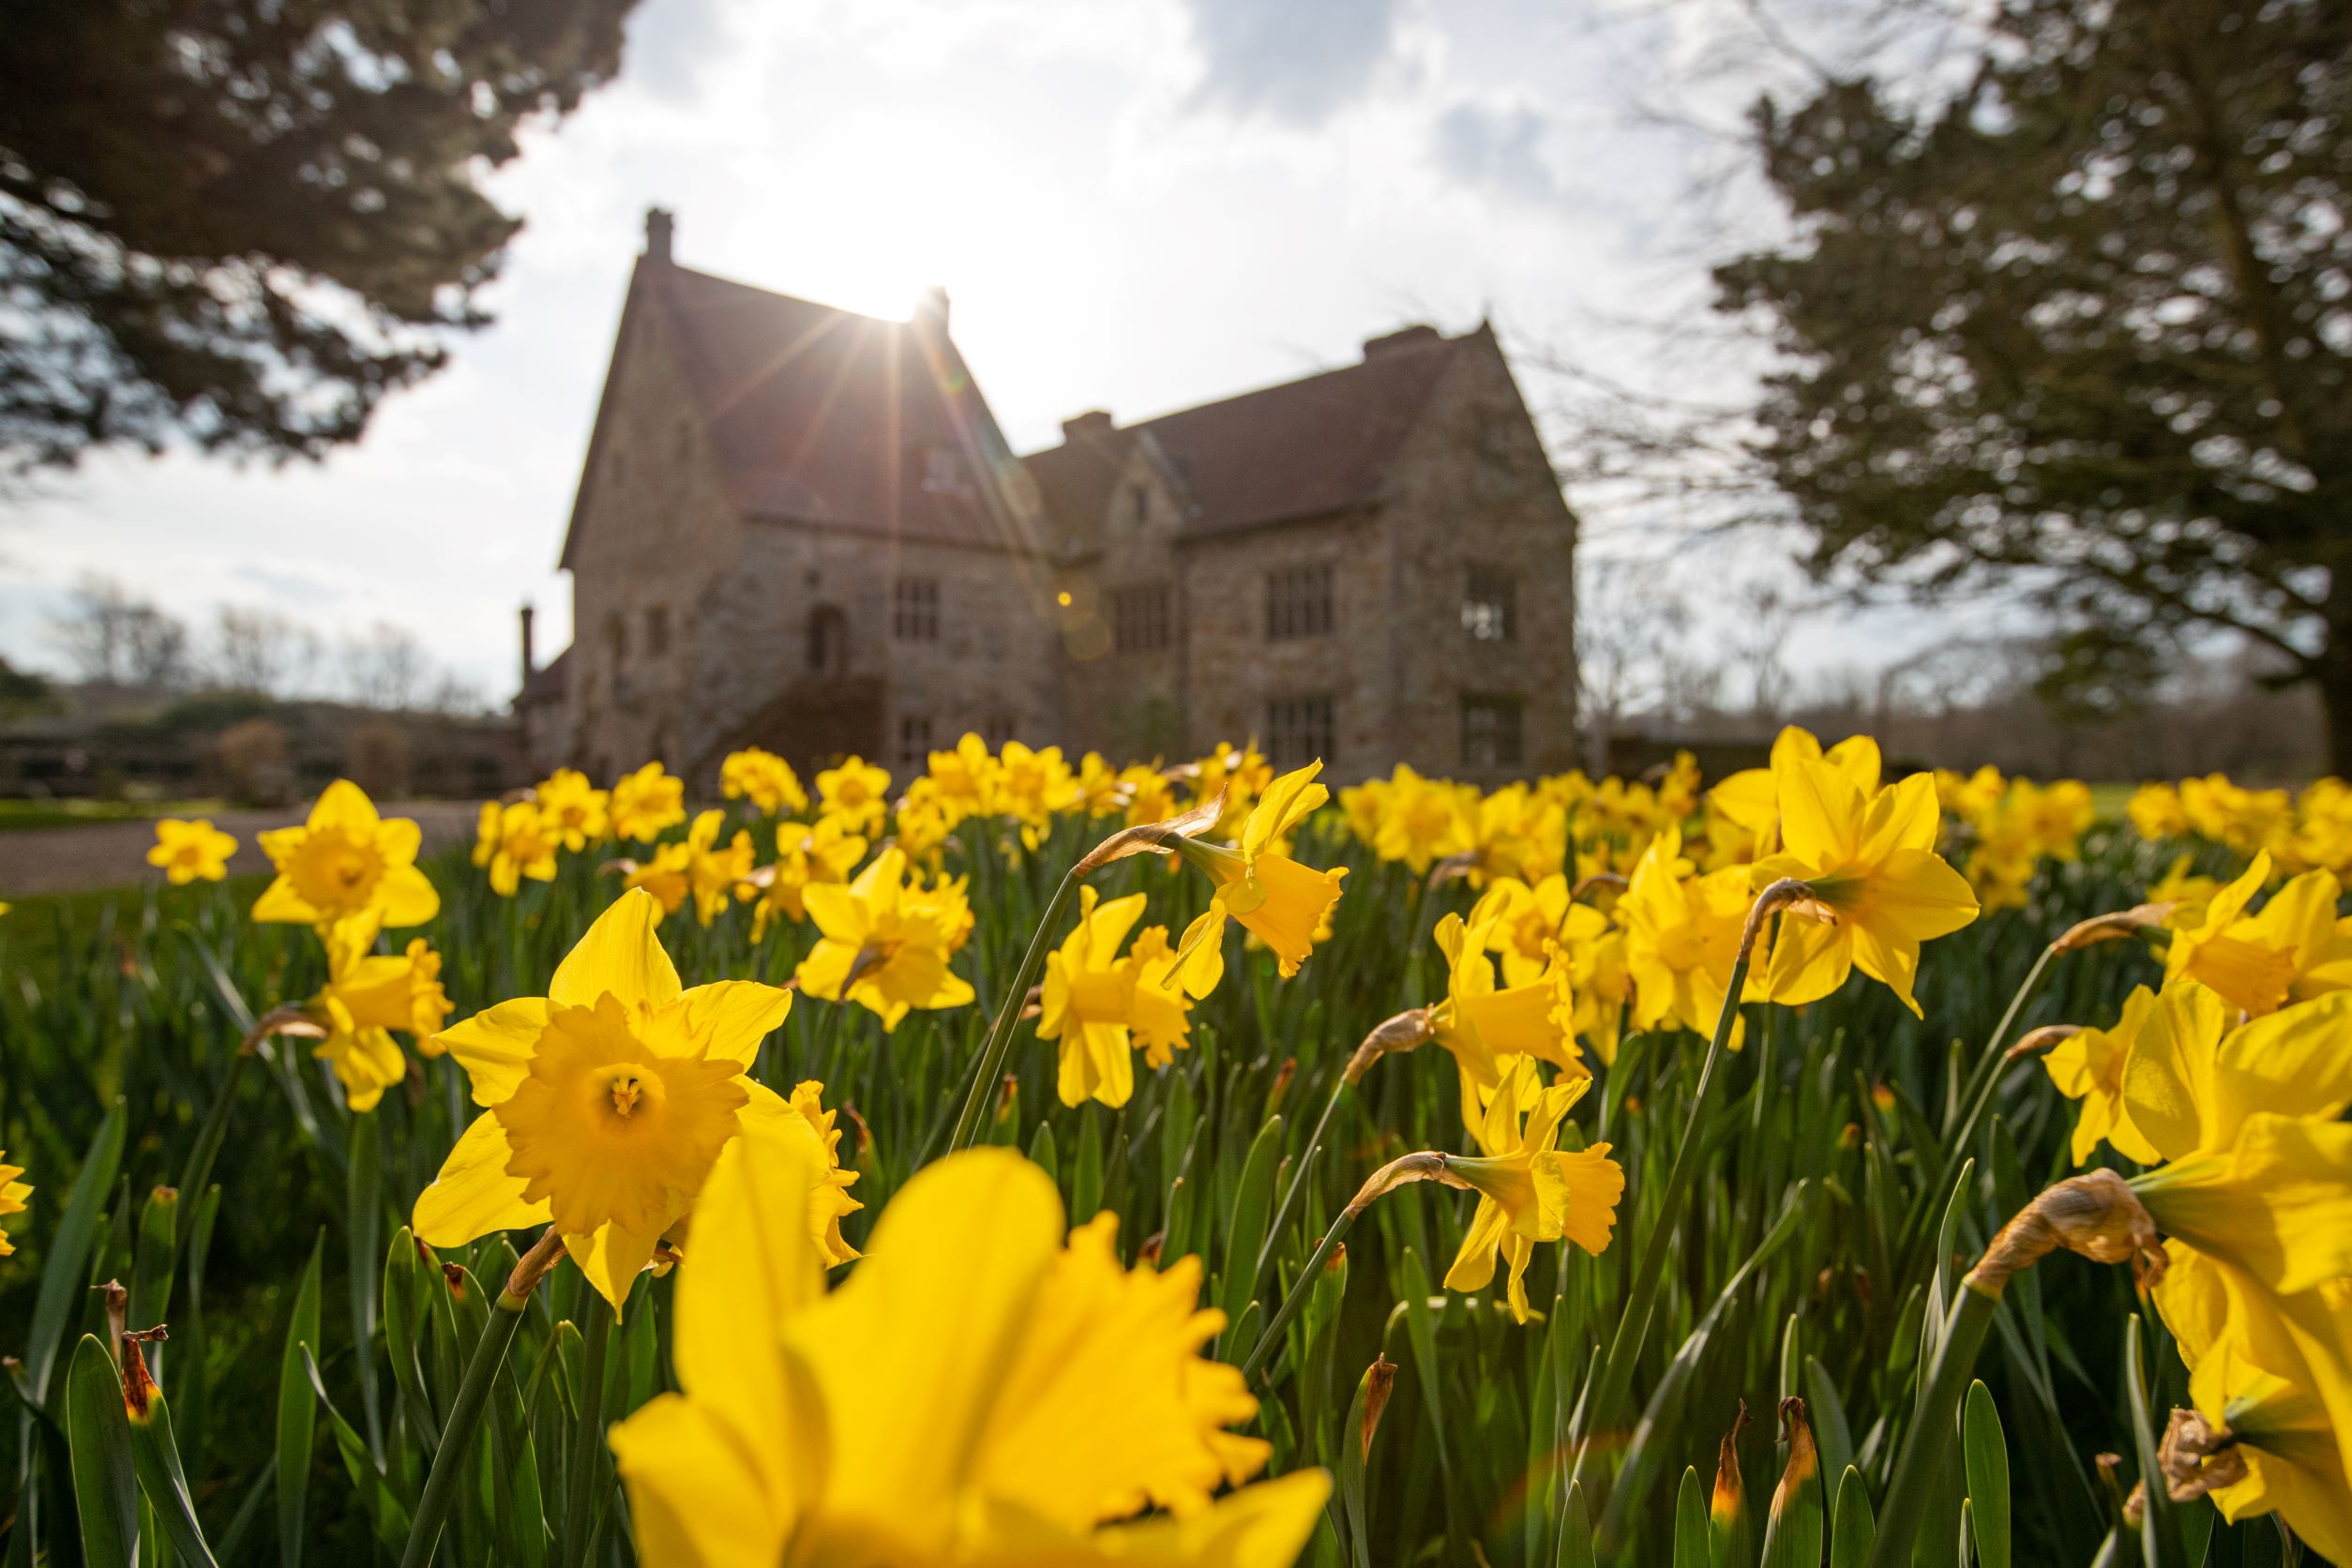 A display of daffodils at Michelham Priory